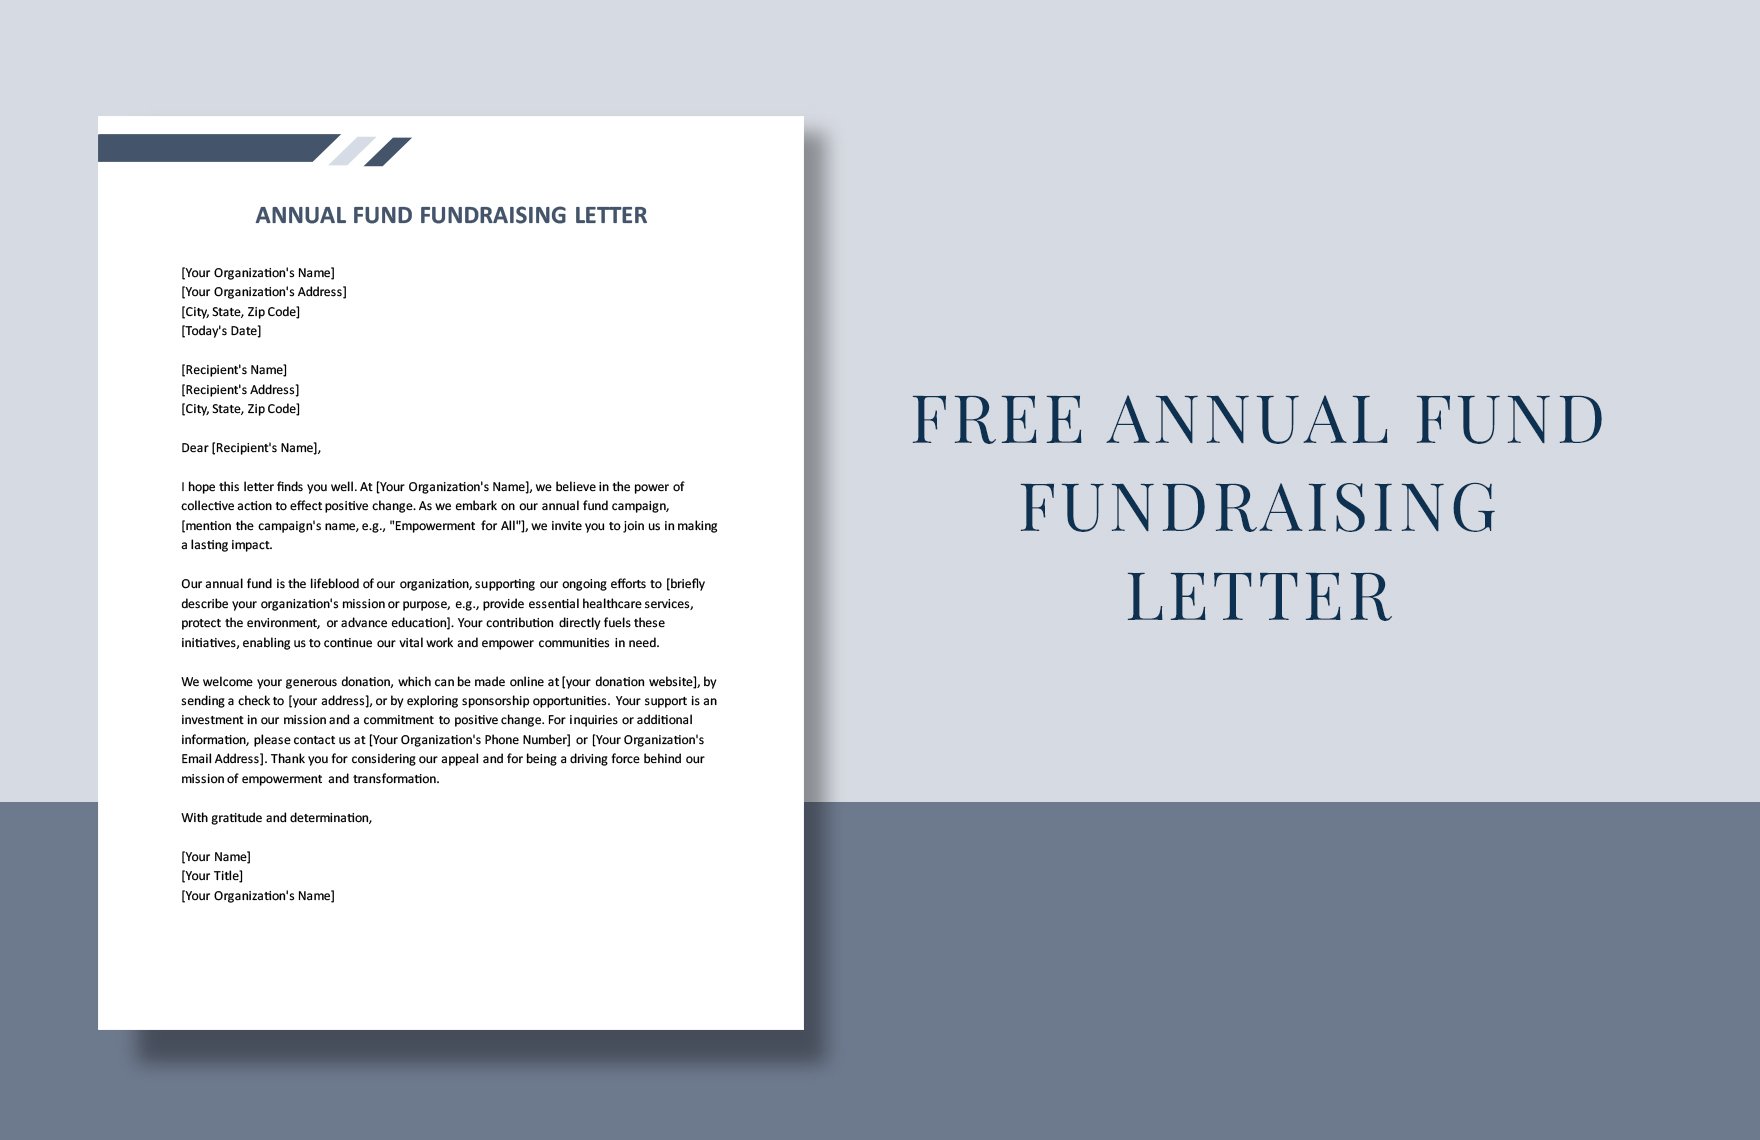 Annual Fund Fundraising Letter